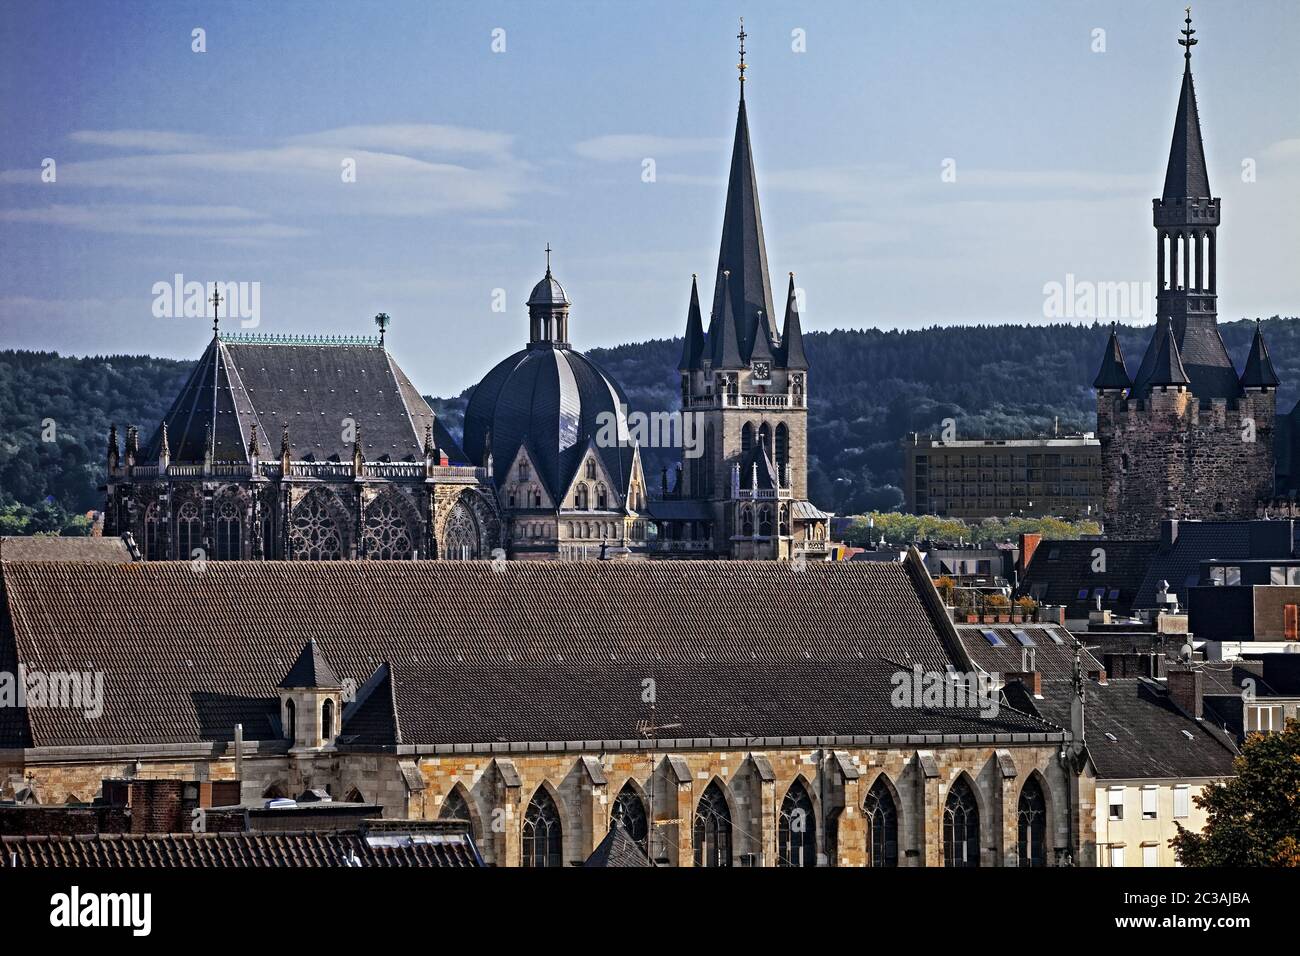 Towers of the cathedral and town hall over the roofs of the city, Aachen, Germany, Europe Stock Photo